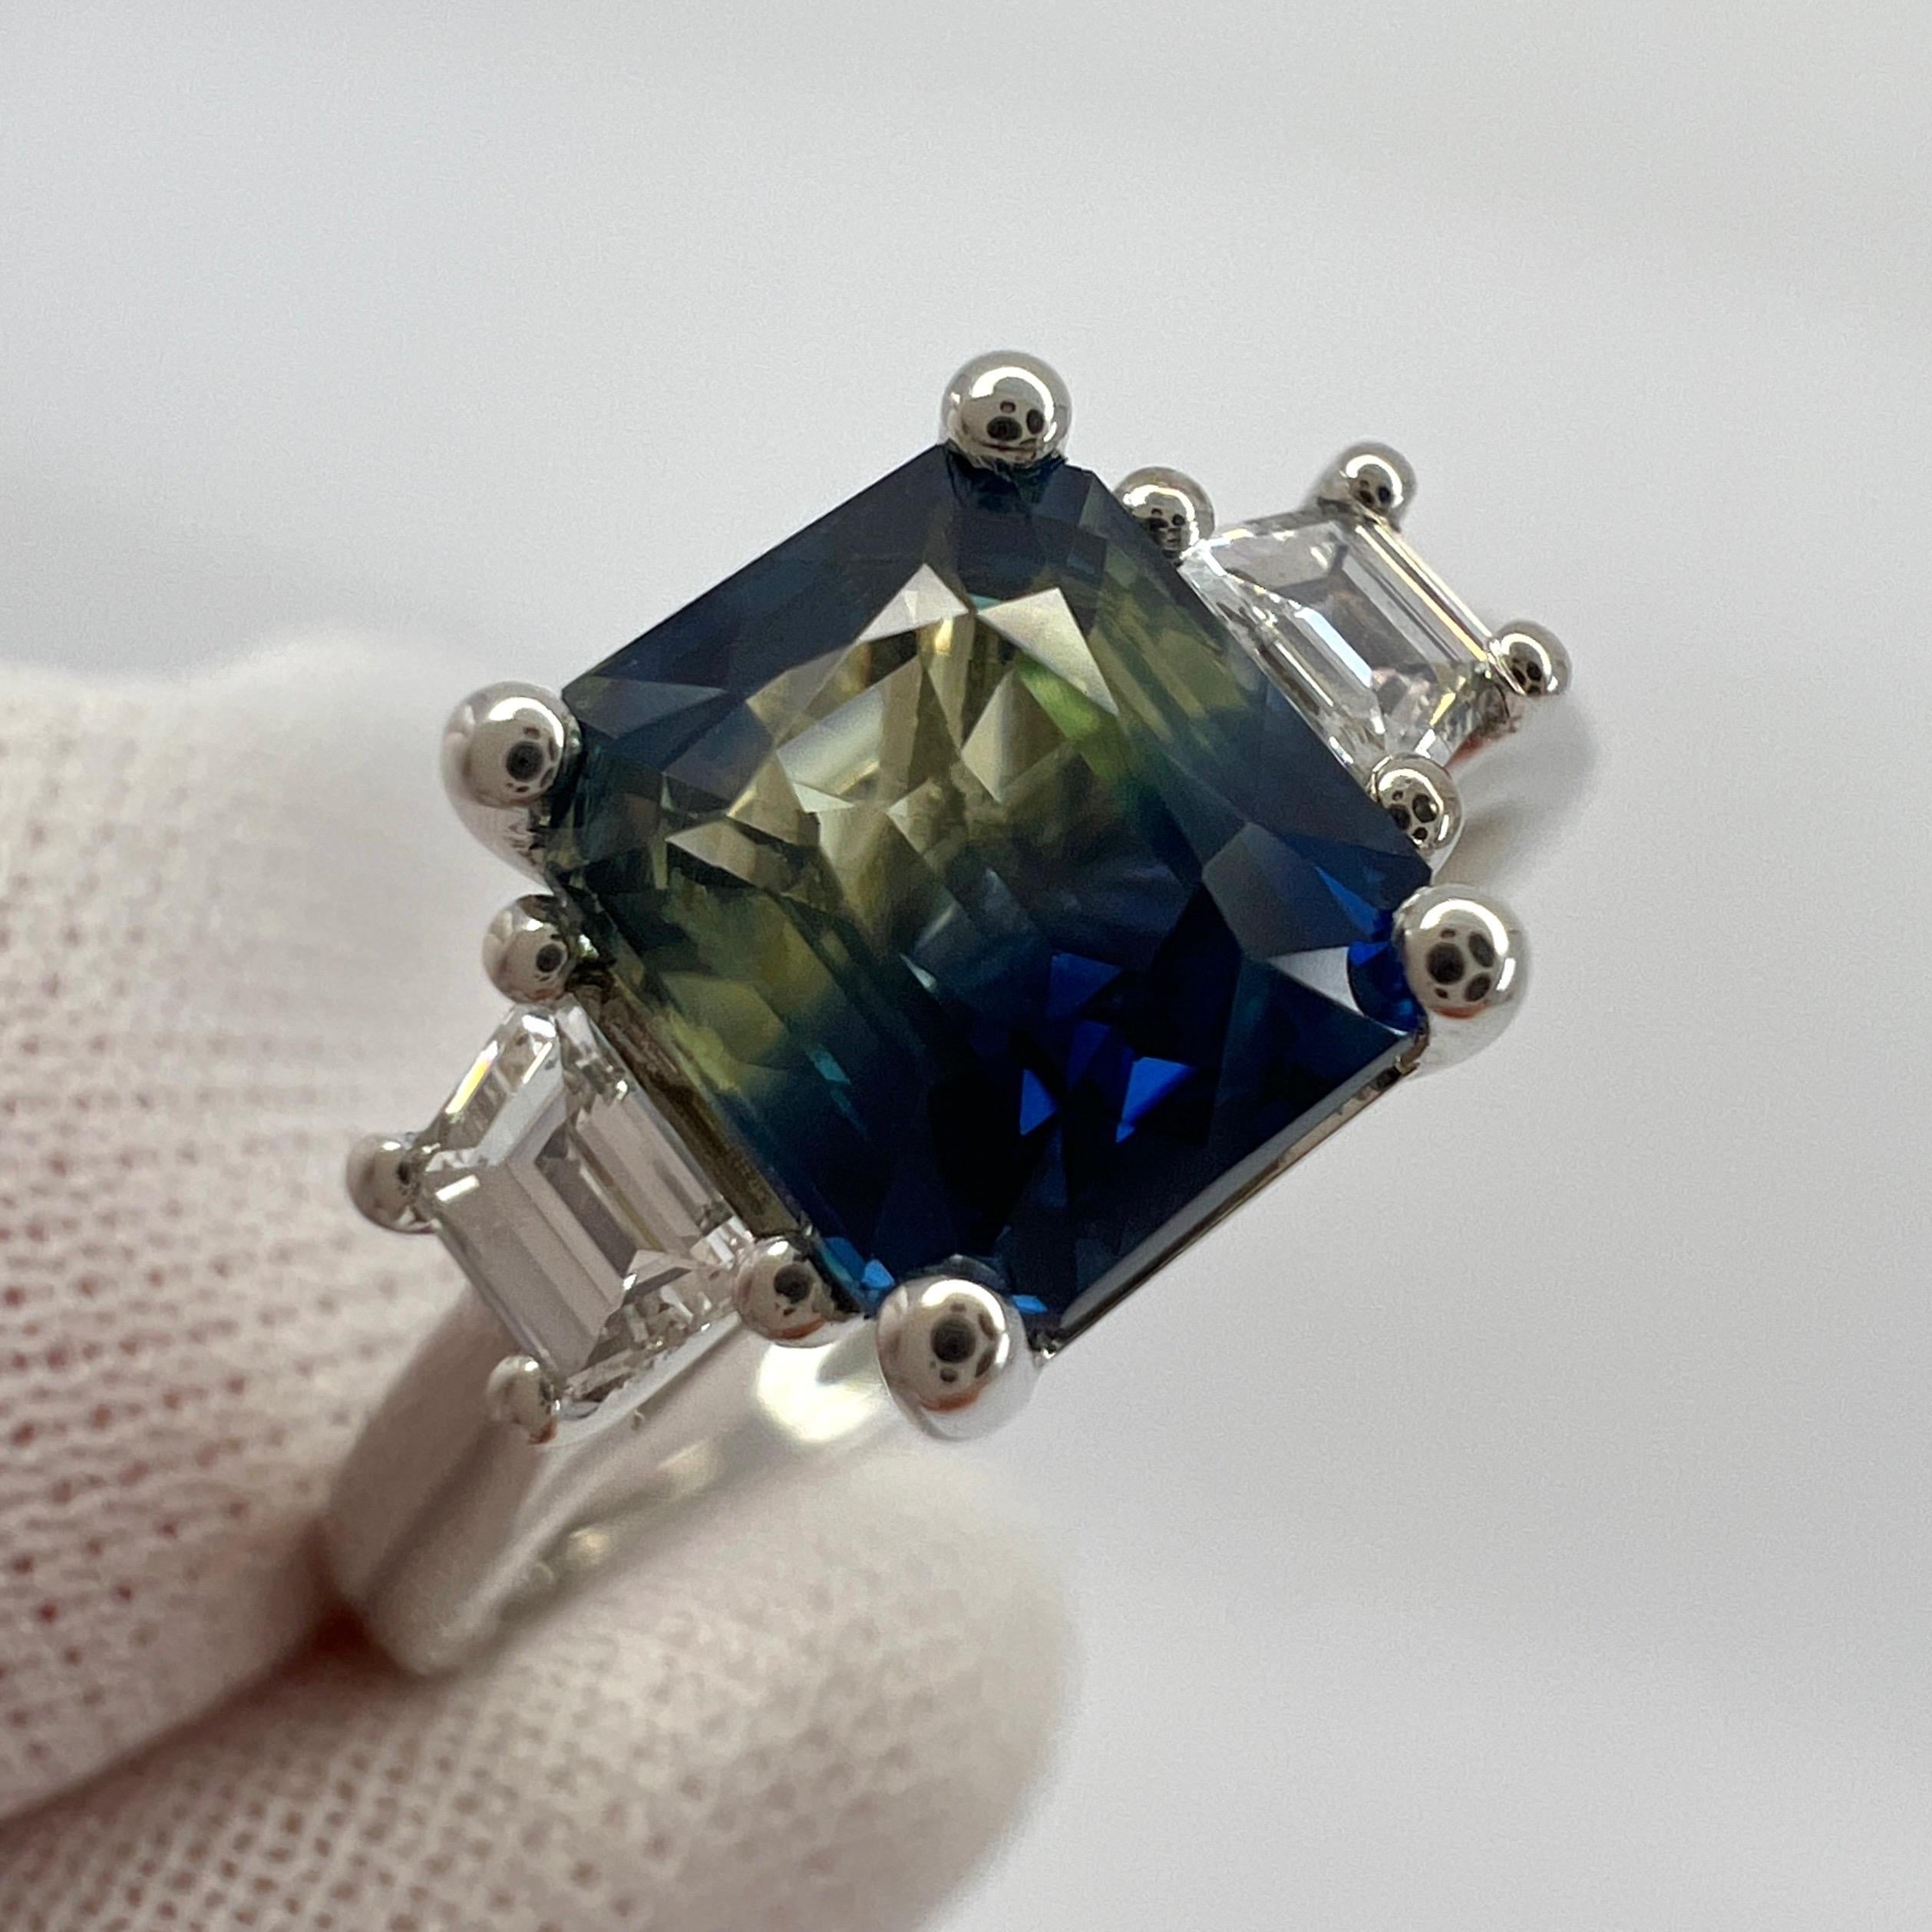 ITSIT Natural Parti Colour Untreated Australian Sapphire 18k White Gold Three Stone Ring.

Rare GIA Certified 1.70 Carat Australian sapphire with a stunning blue yellow/green bi colour effect. Very rare and beautiful to see, similarly seen in